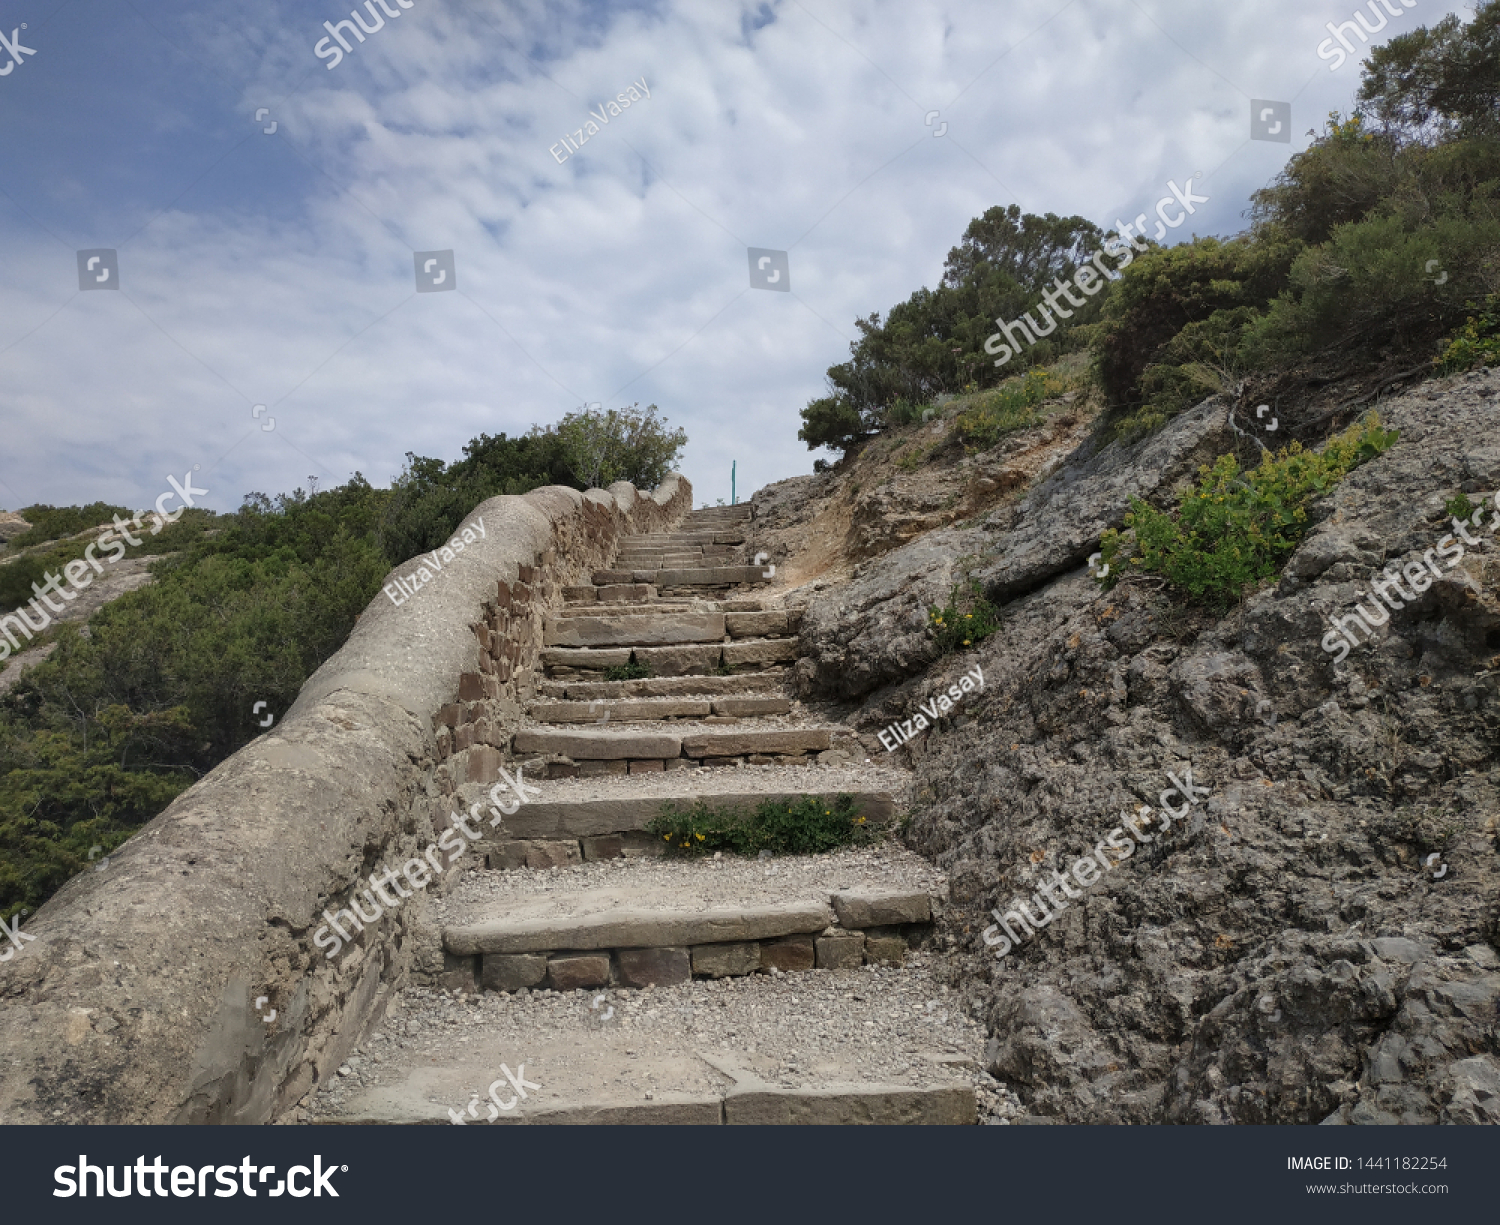 stone stairs in the mountains #1441182254